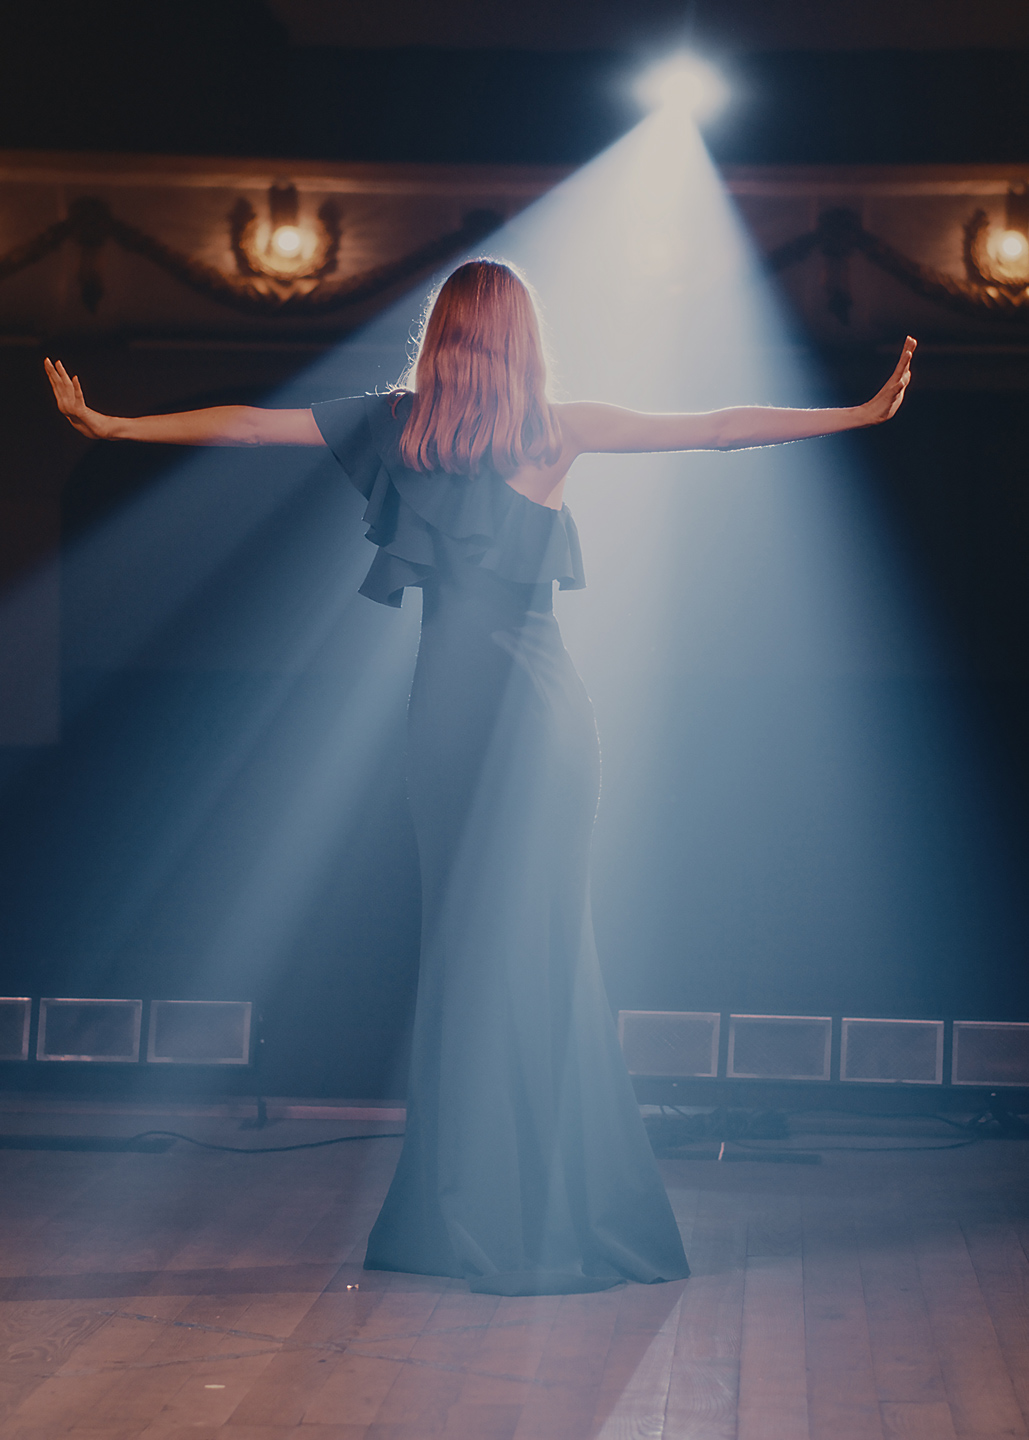 A woman onstage in a spotlight